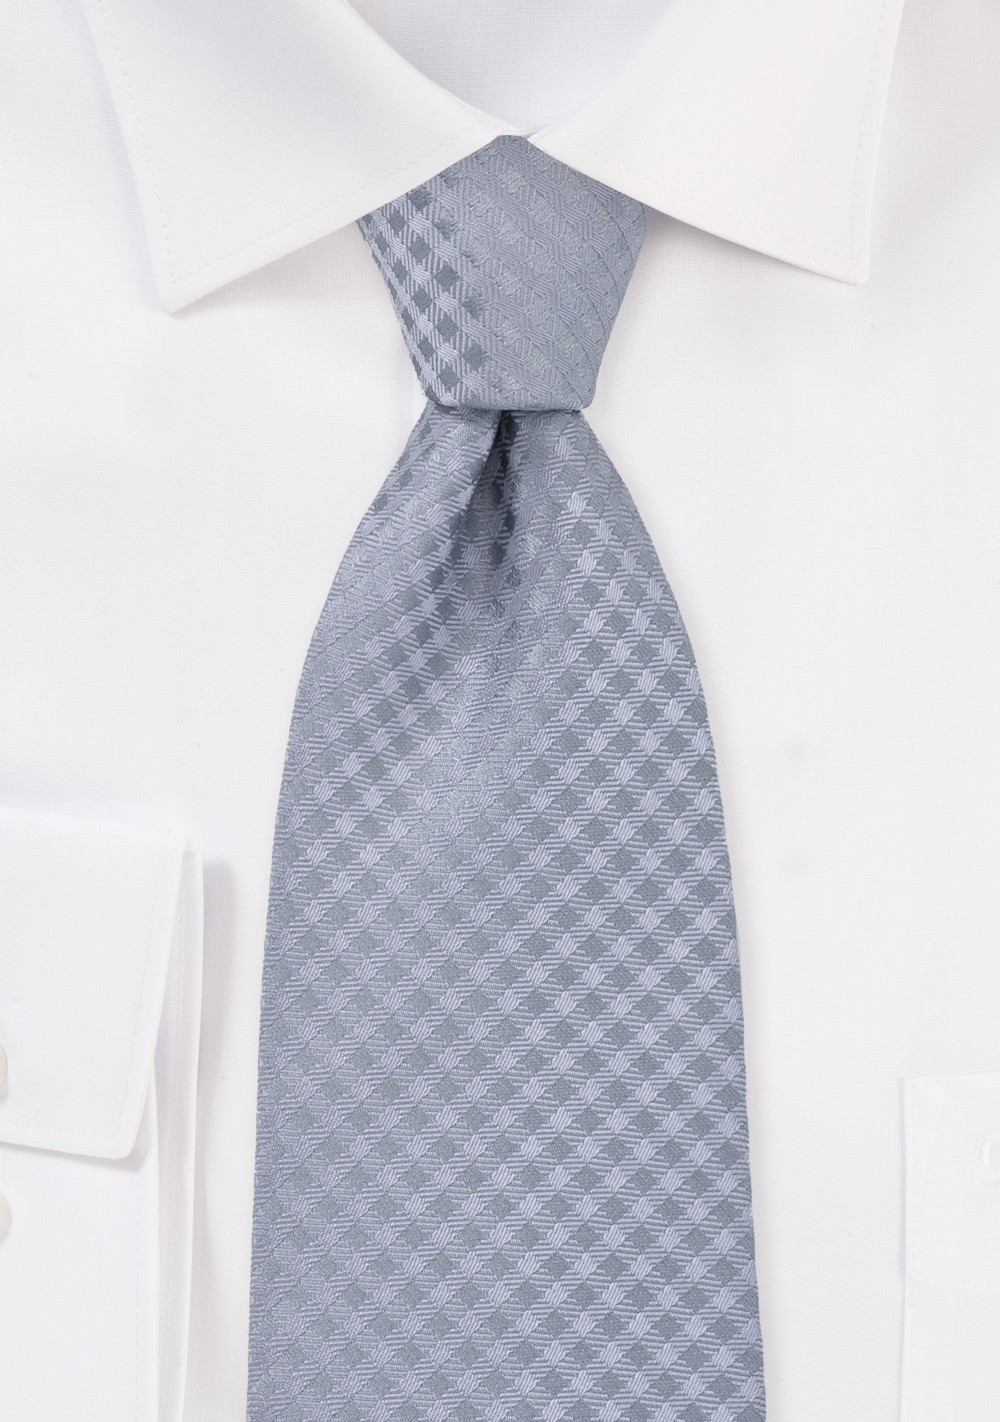 Gingham Check Tie in Solid Silver